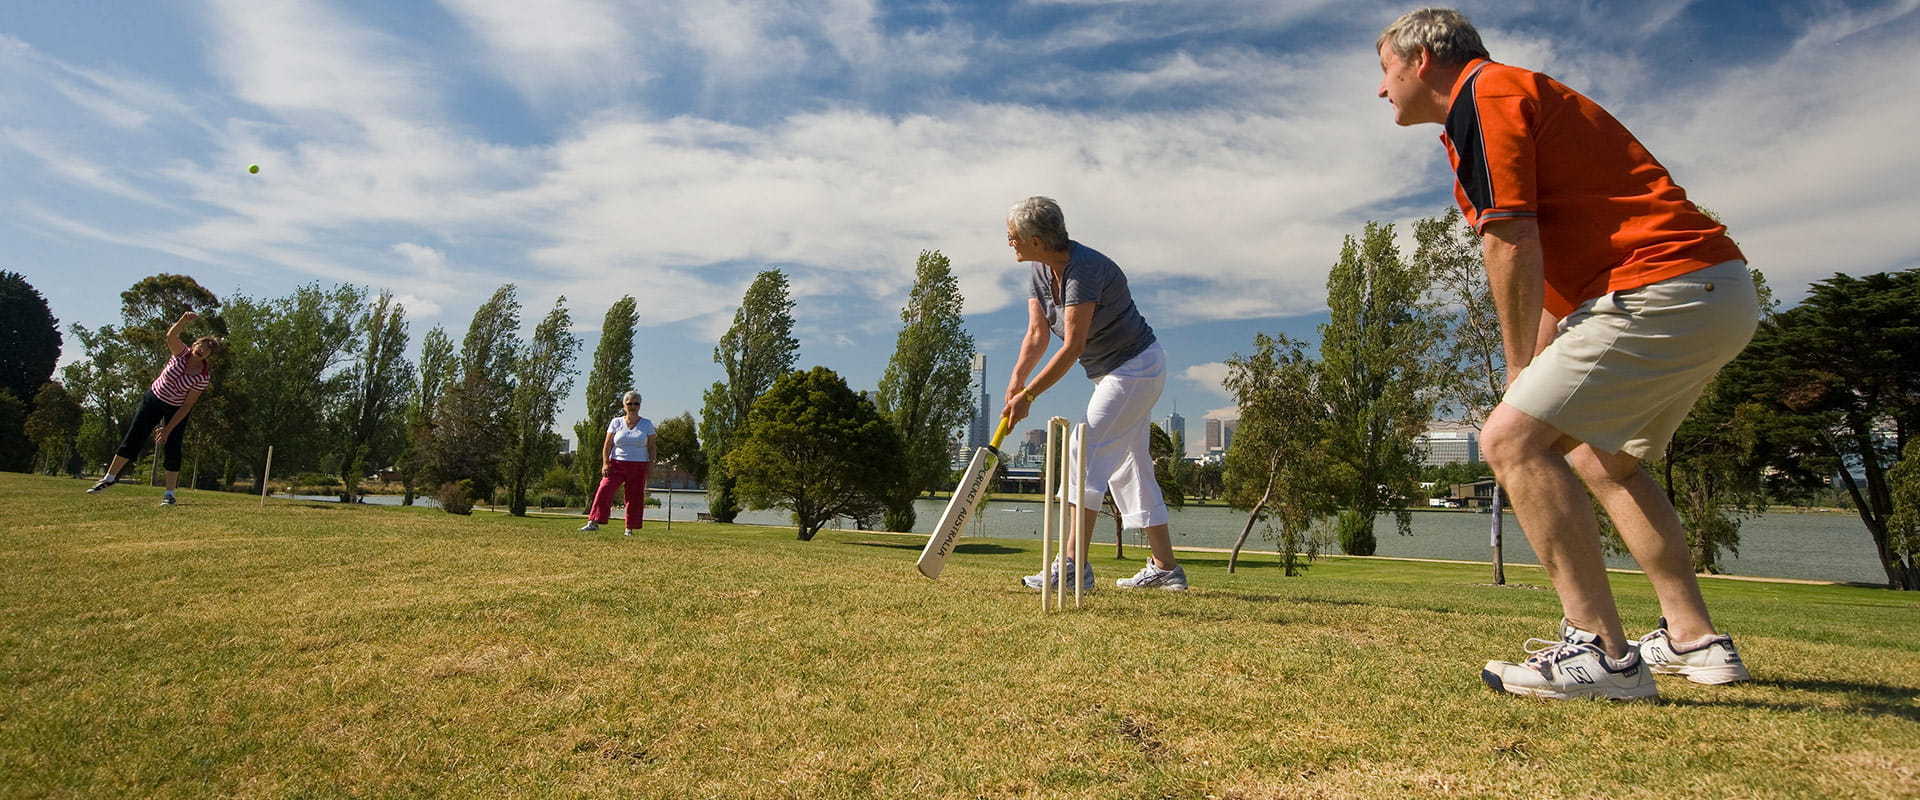 A group of community members play a game of cricket near the lake.